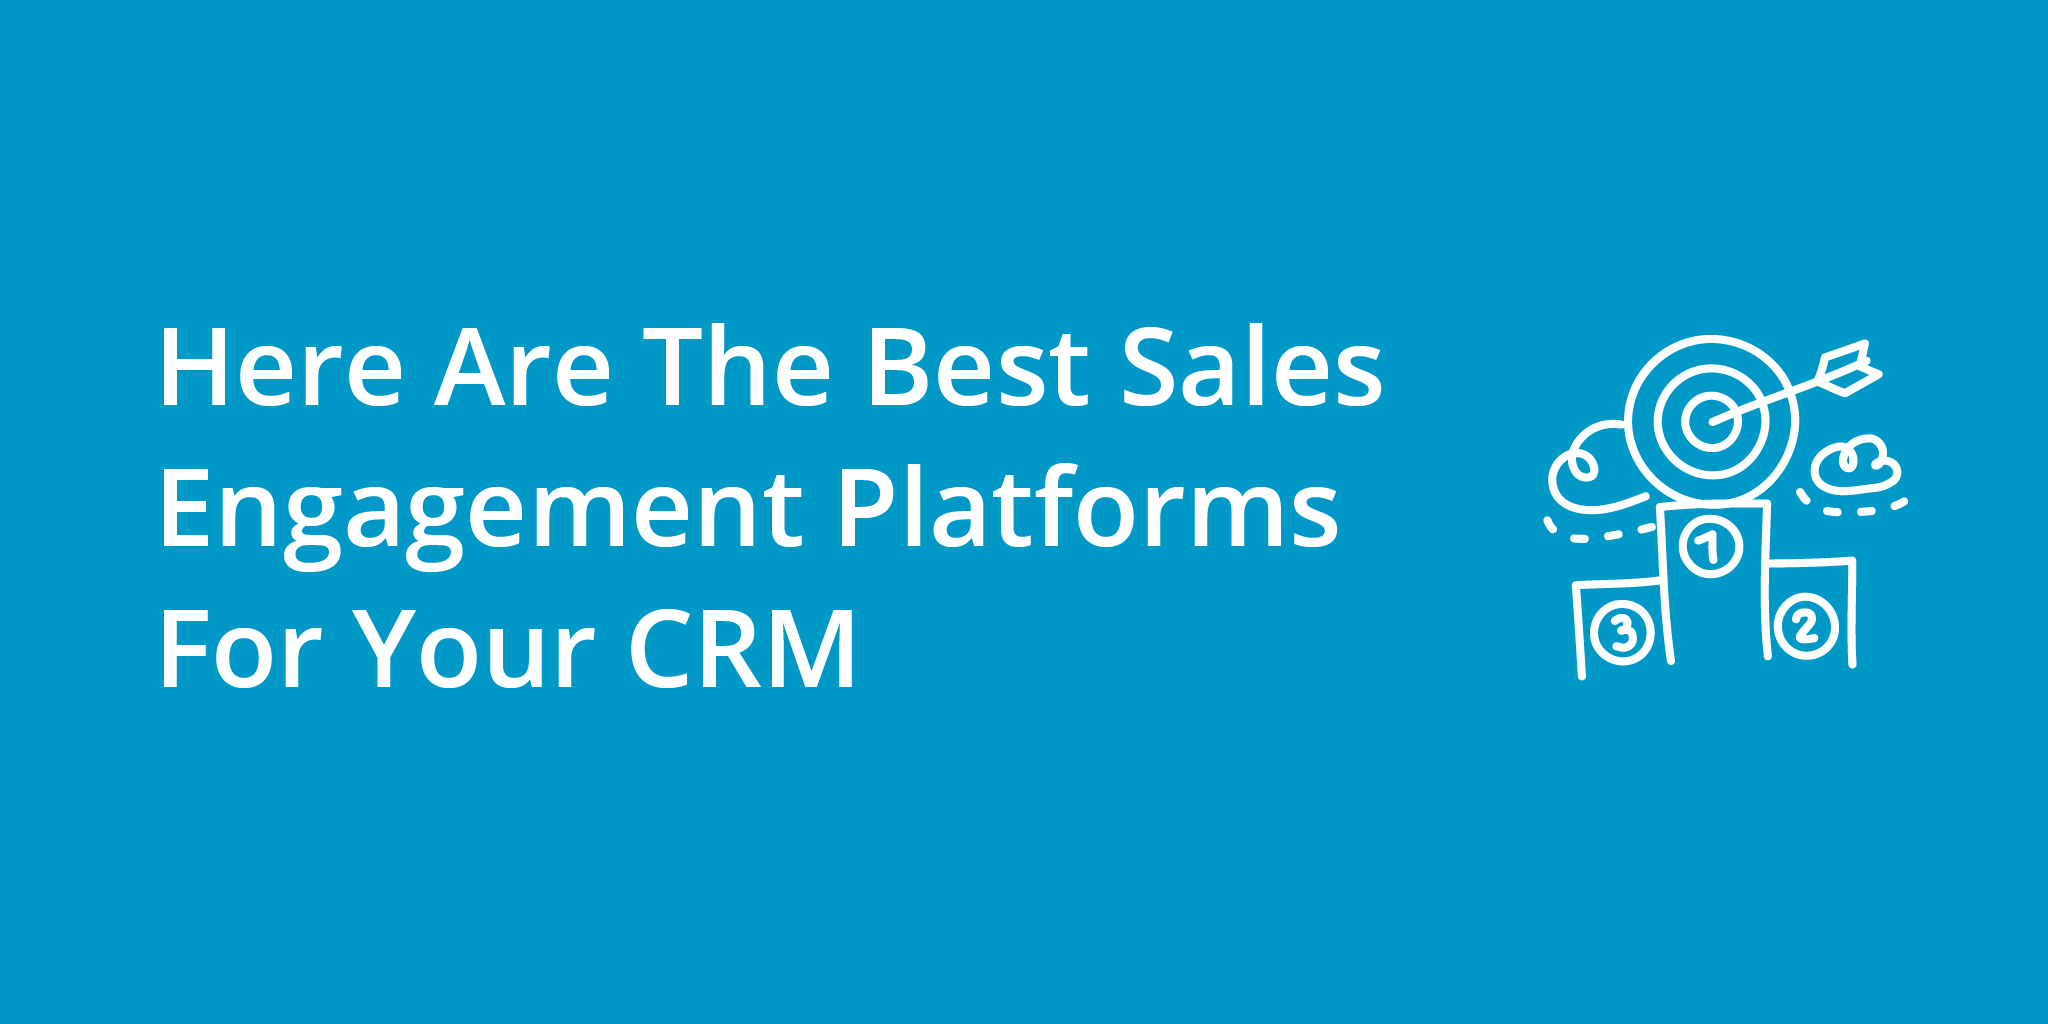 Here Are The Best Sales Engagement Platforms For Your CRM | Telephones for business